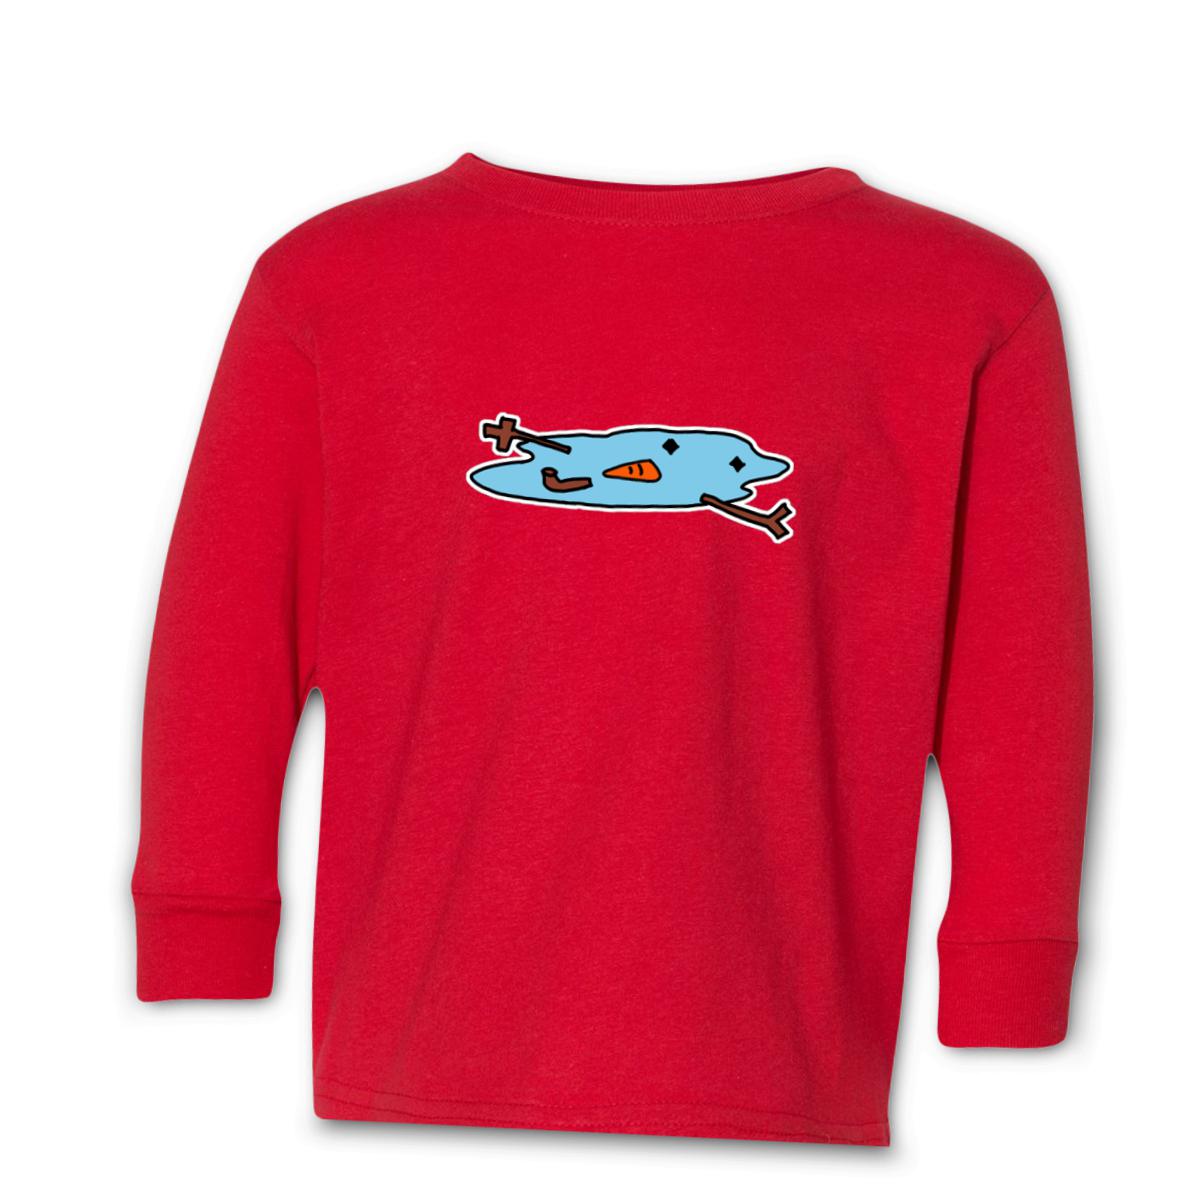 Snowman Puddle Toddler Long Sleeve Tee 2T red